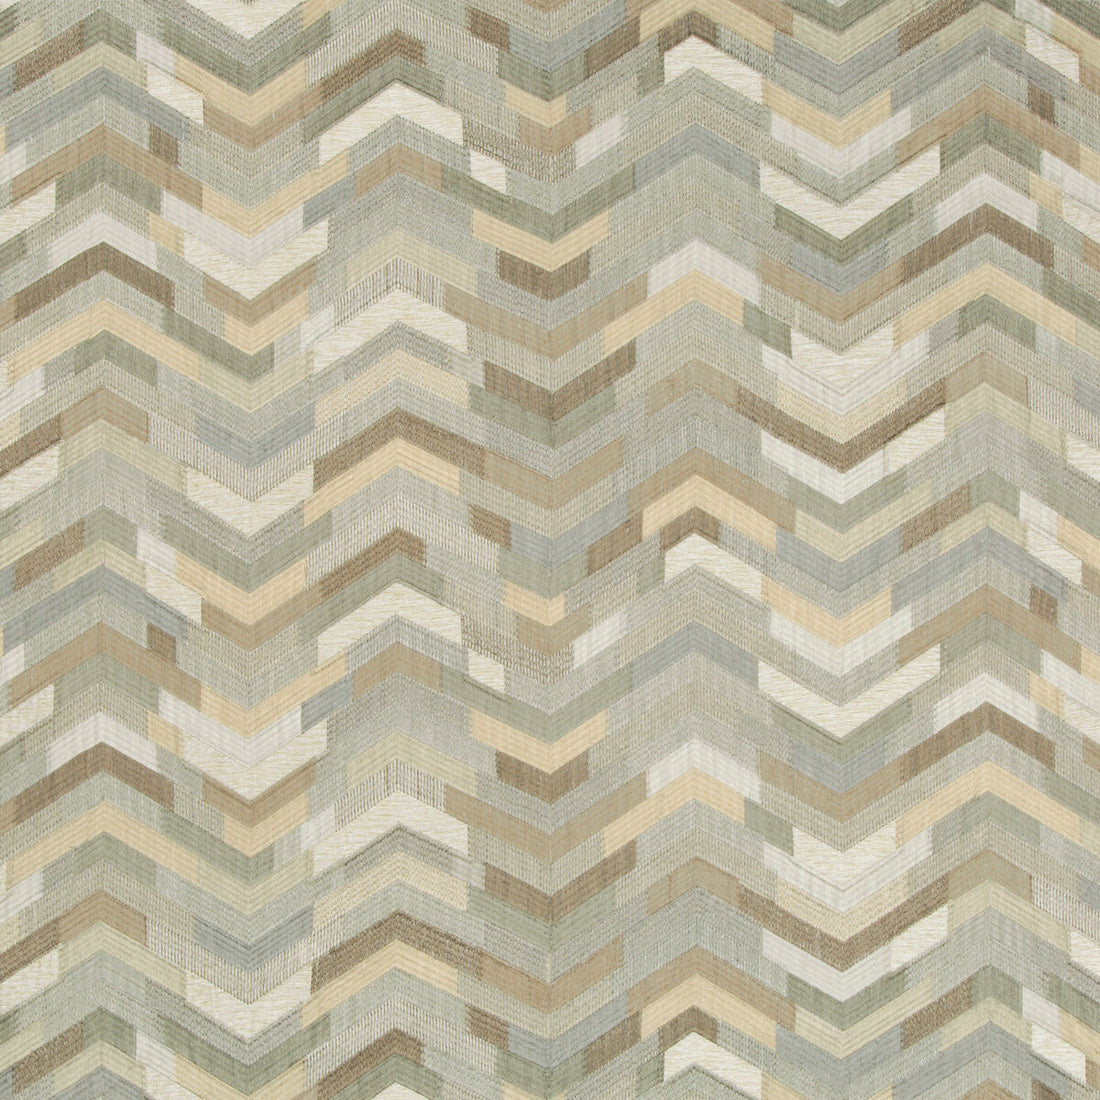 Catwalk fabric in limestone color - pattern 34930.1611.0 - by Kravet Couture in the Modern Tailor collection